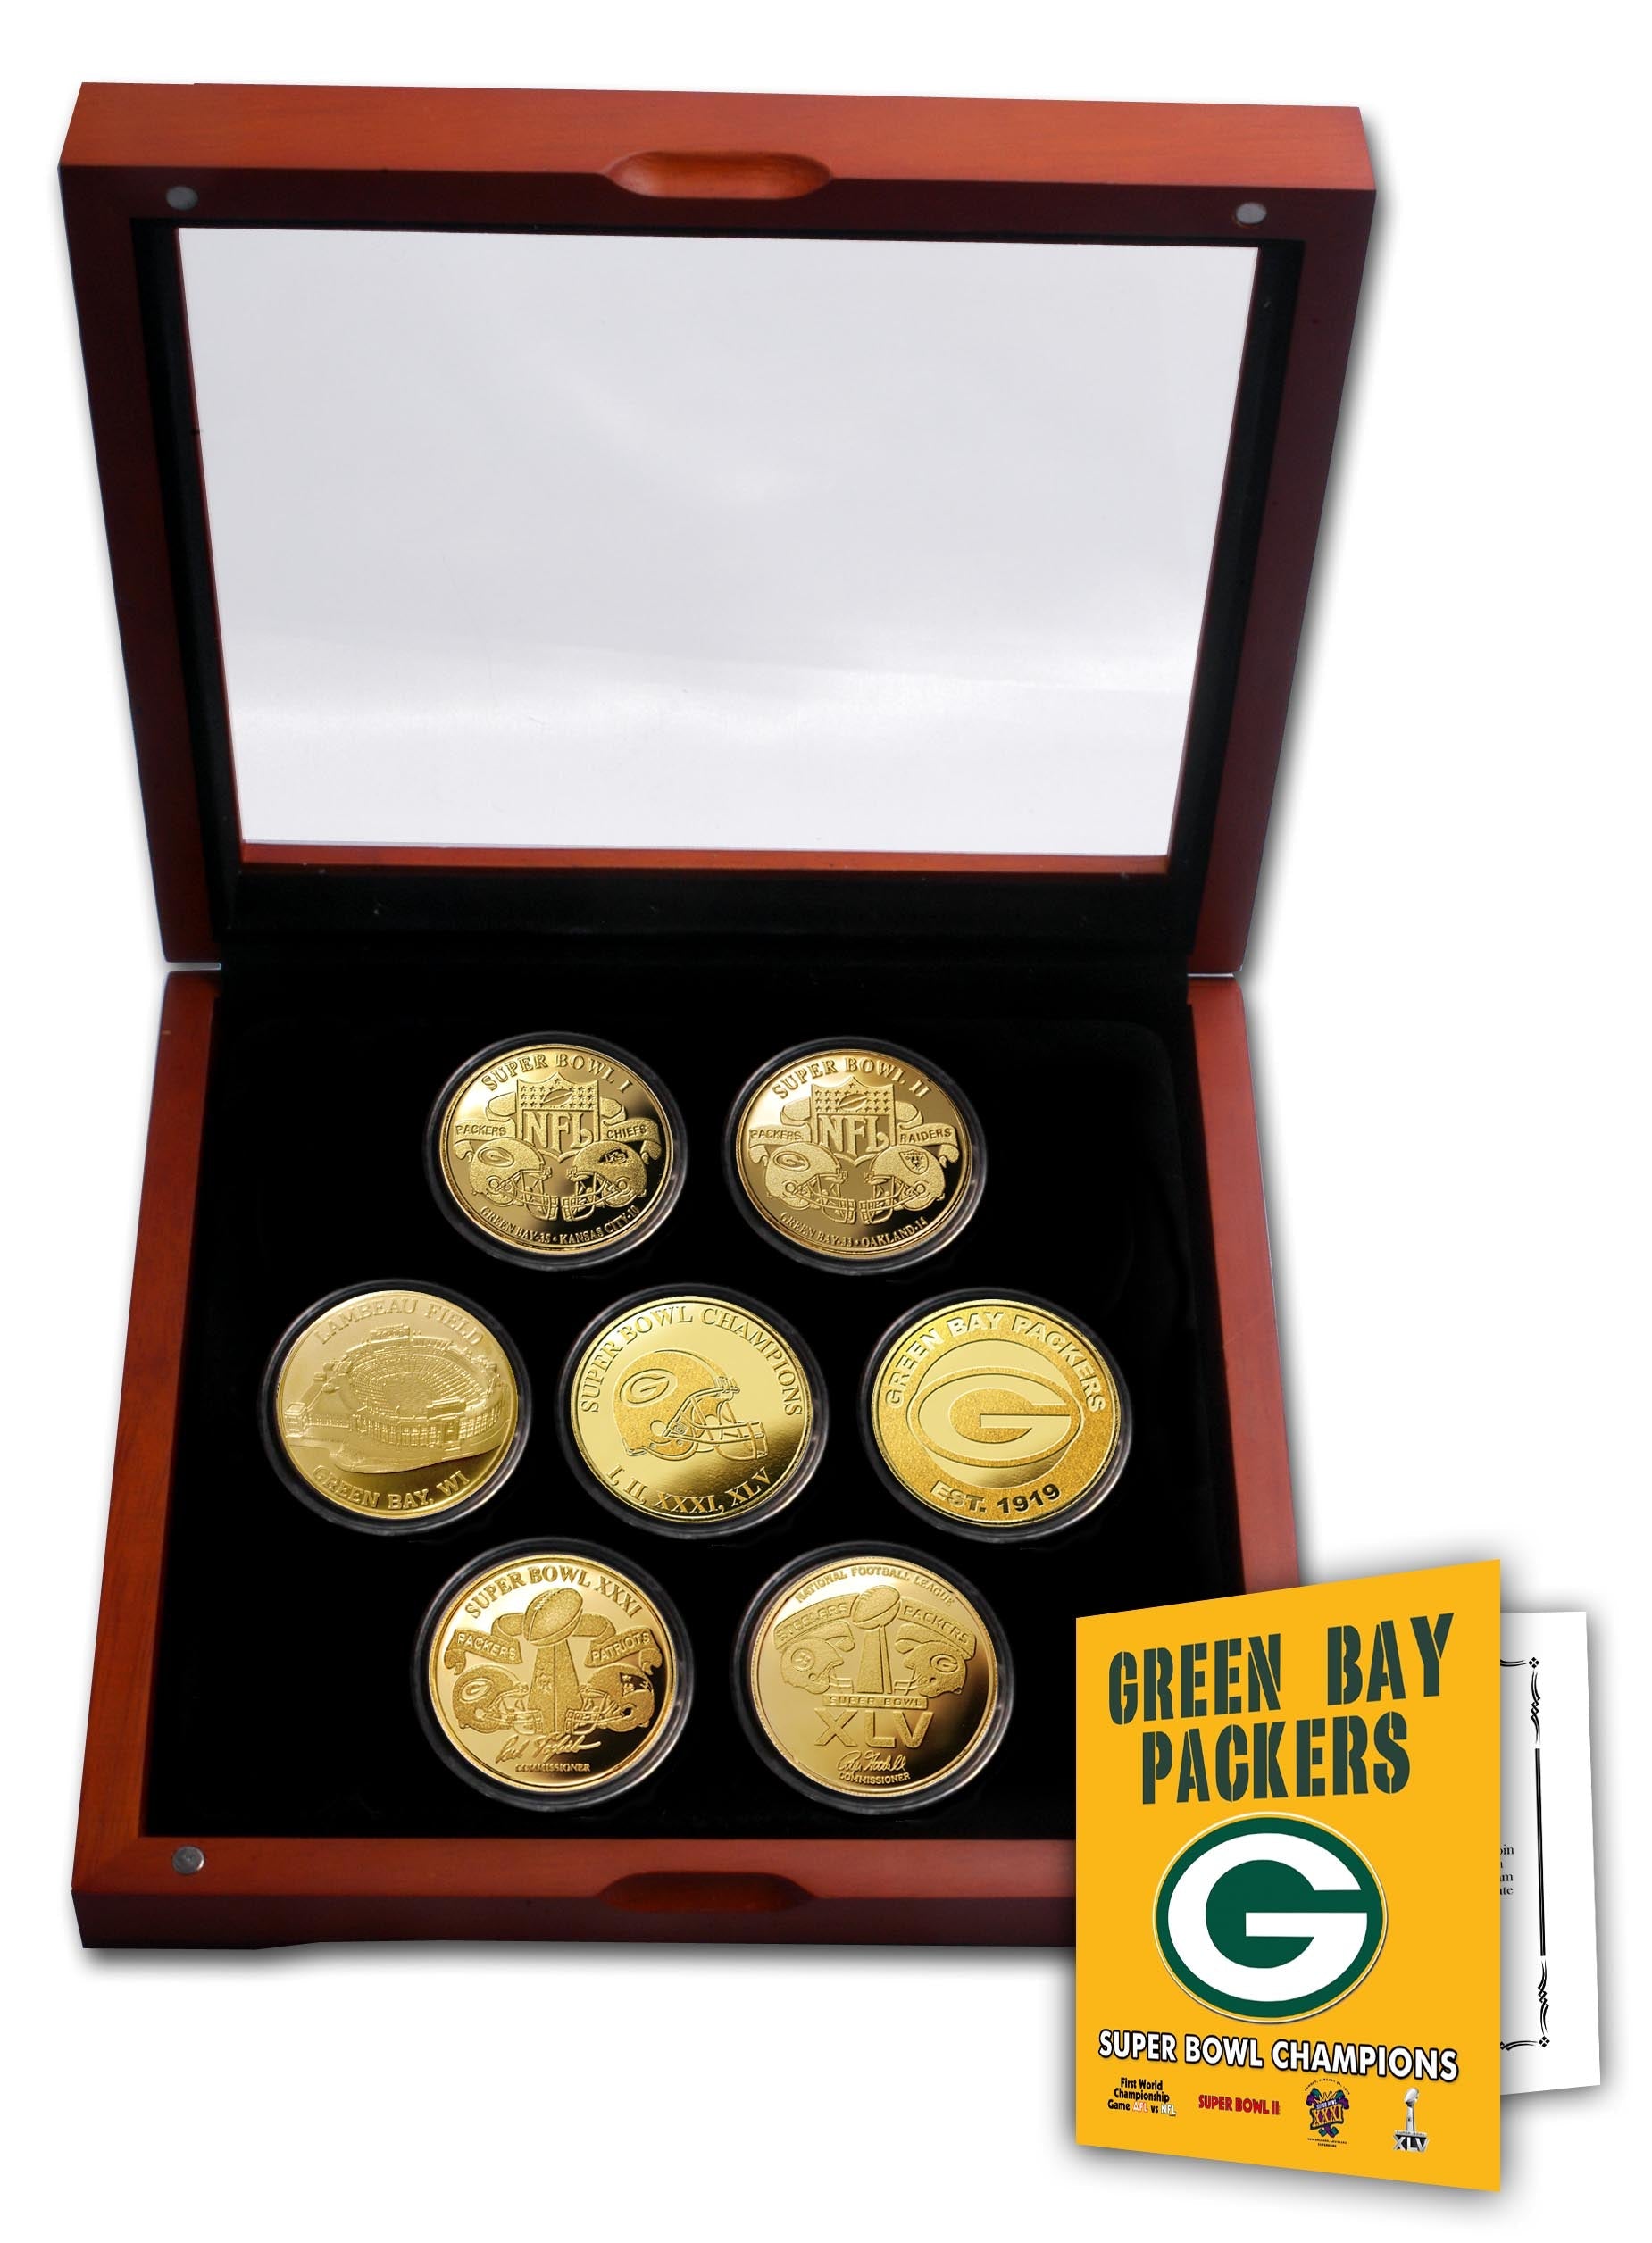 Green Bay Packers Super Bowl Champions Gold 7 Coin Set